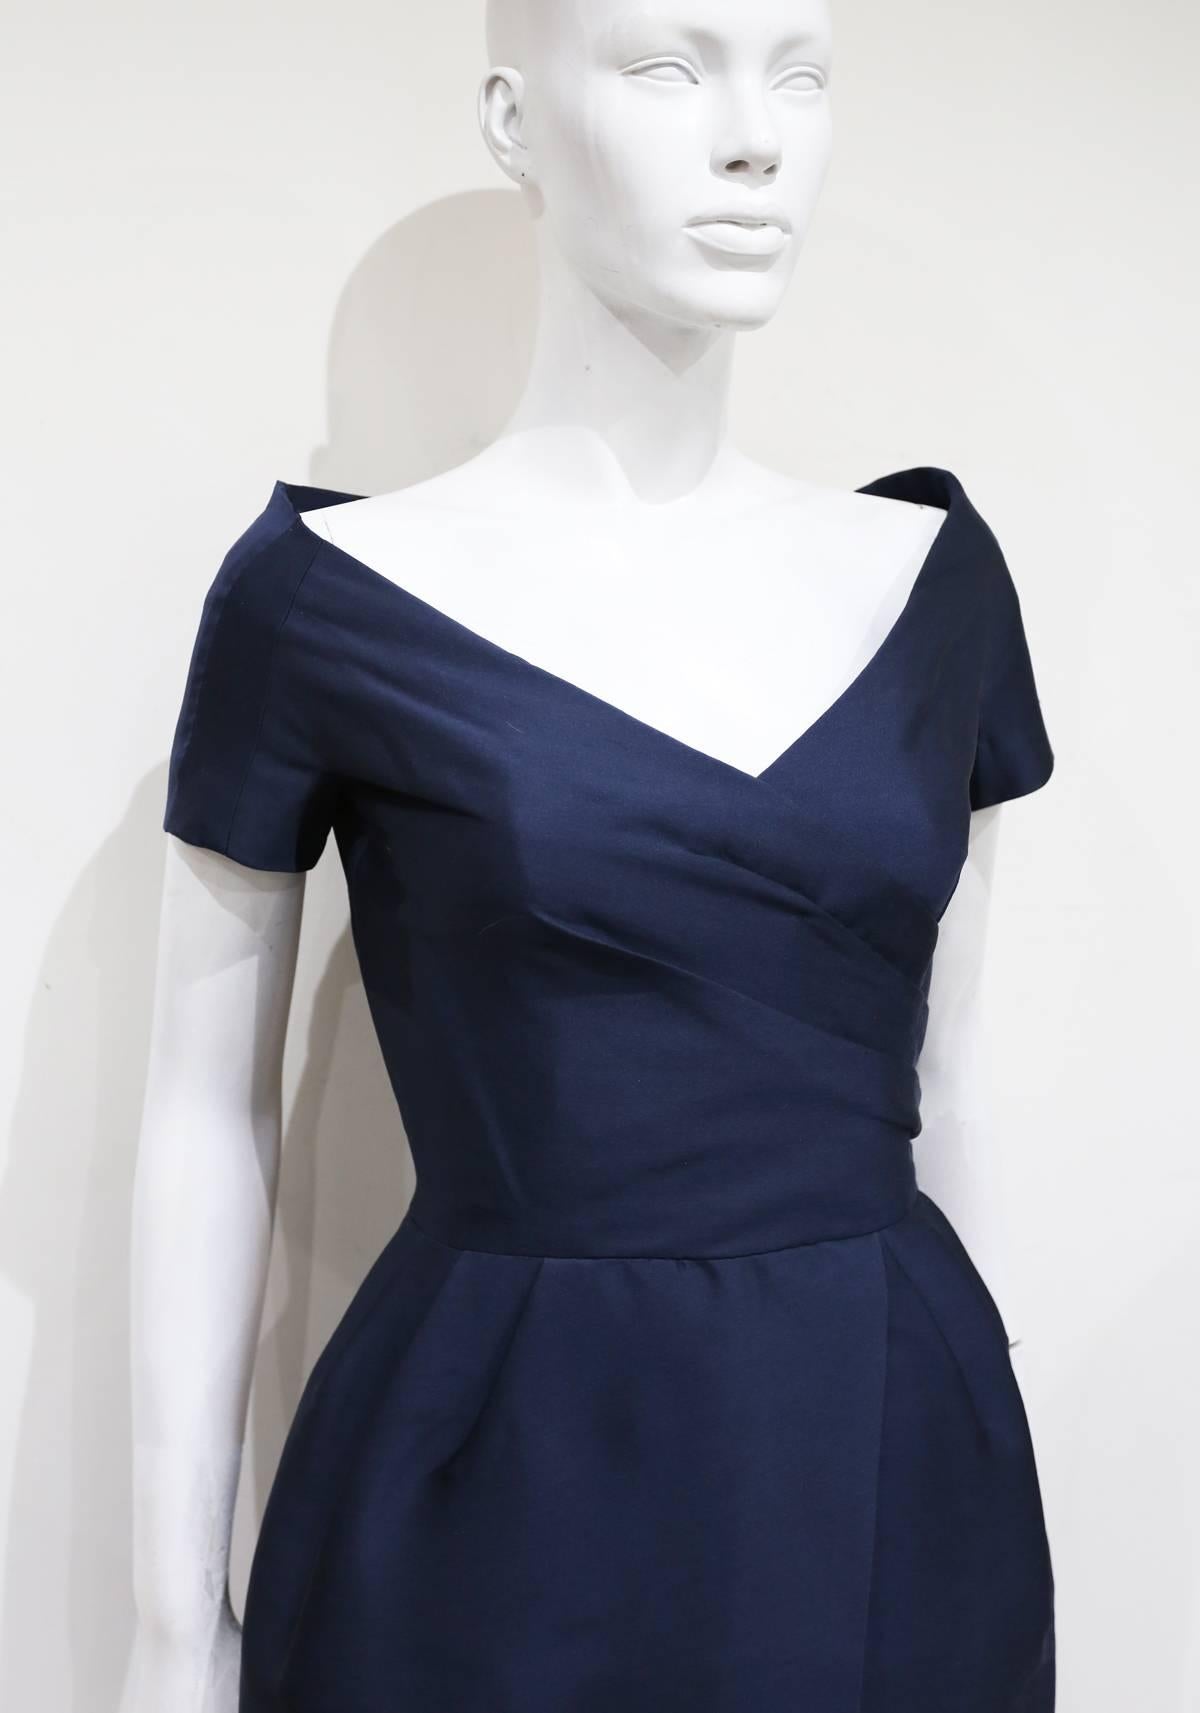 An absolutely beautiful couture Rose Bertin silk cocktail dress, circa 1950s. The dress has an off-the-shoulder design with pleating across the bust and waist. Inside is a boned corset giving the dress a structured silhouette. Rose Bertin was a